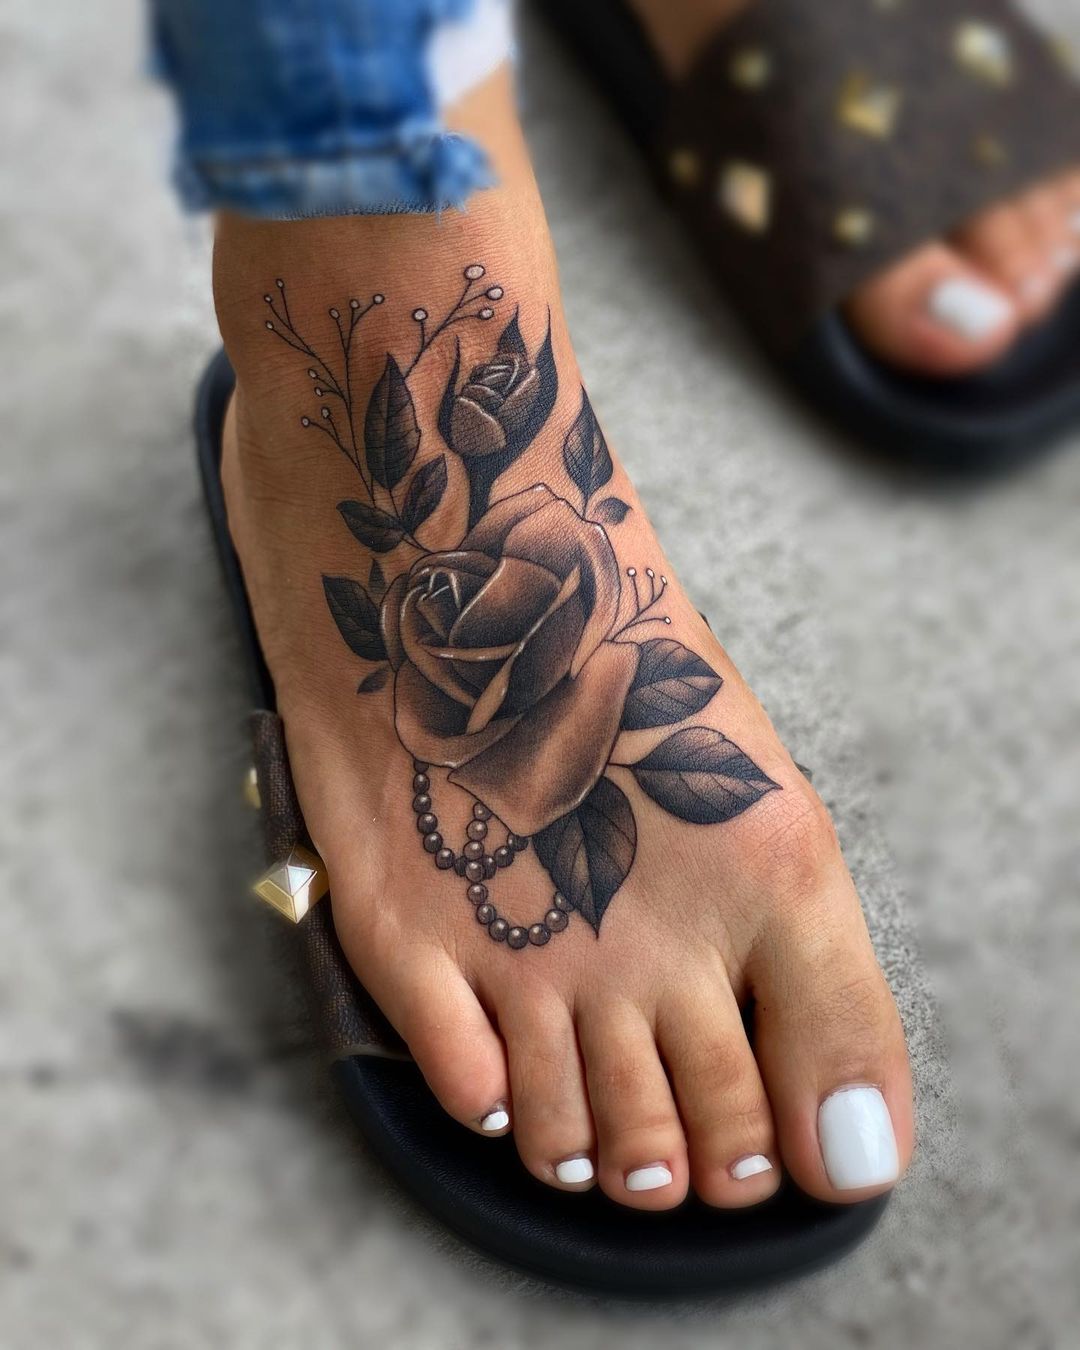 150 Distinctive And Trendy Foot Tattoo Designs To Flaunt Your Look - Psycho Tats